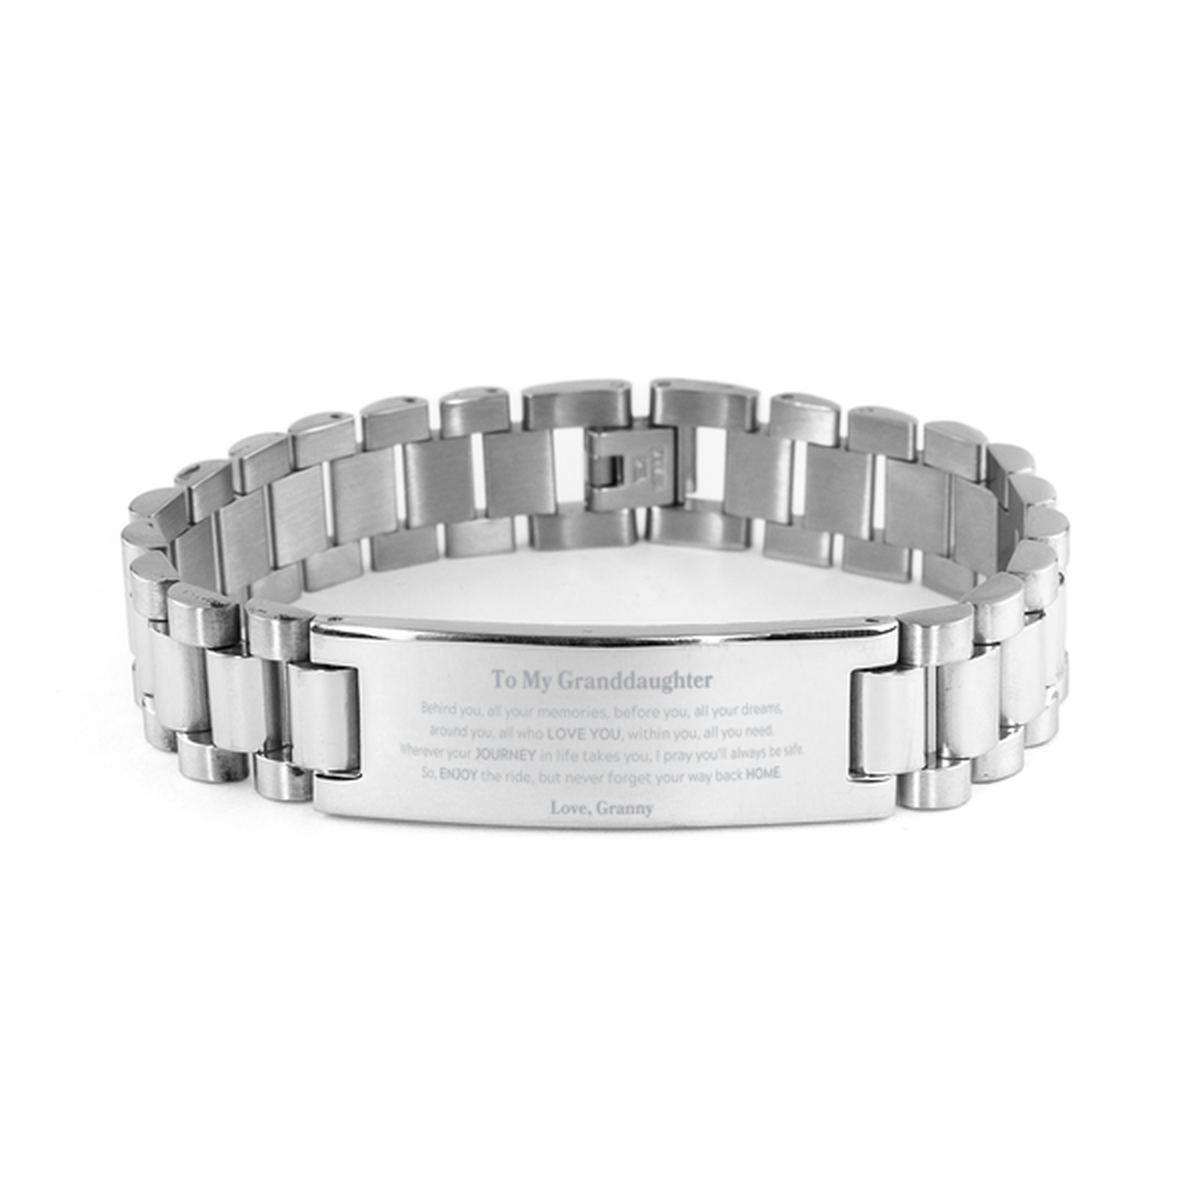 To My Granddaughter Graduation Gifts from Granny, Granddaughter Ladder Stainless Steel Bracelet Christmas Birthday Gifts for Granddaughter Behind you, all your memories, before you, all your dreams. Love, Granny